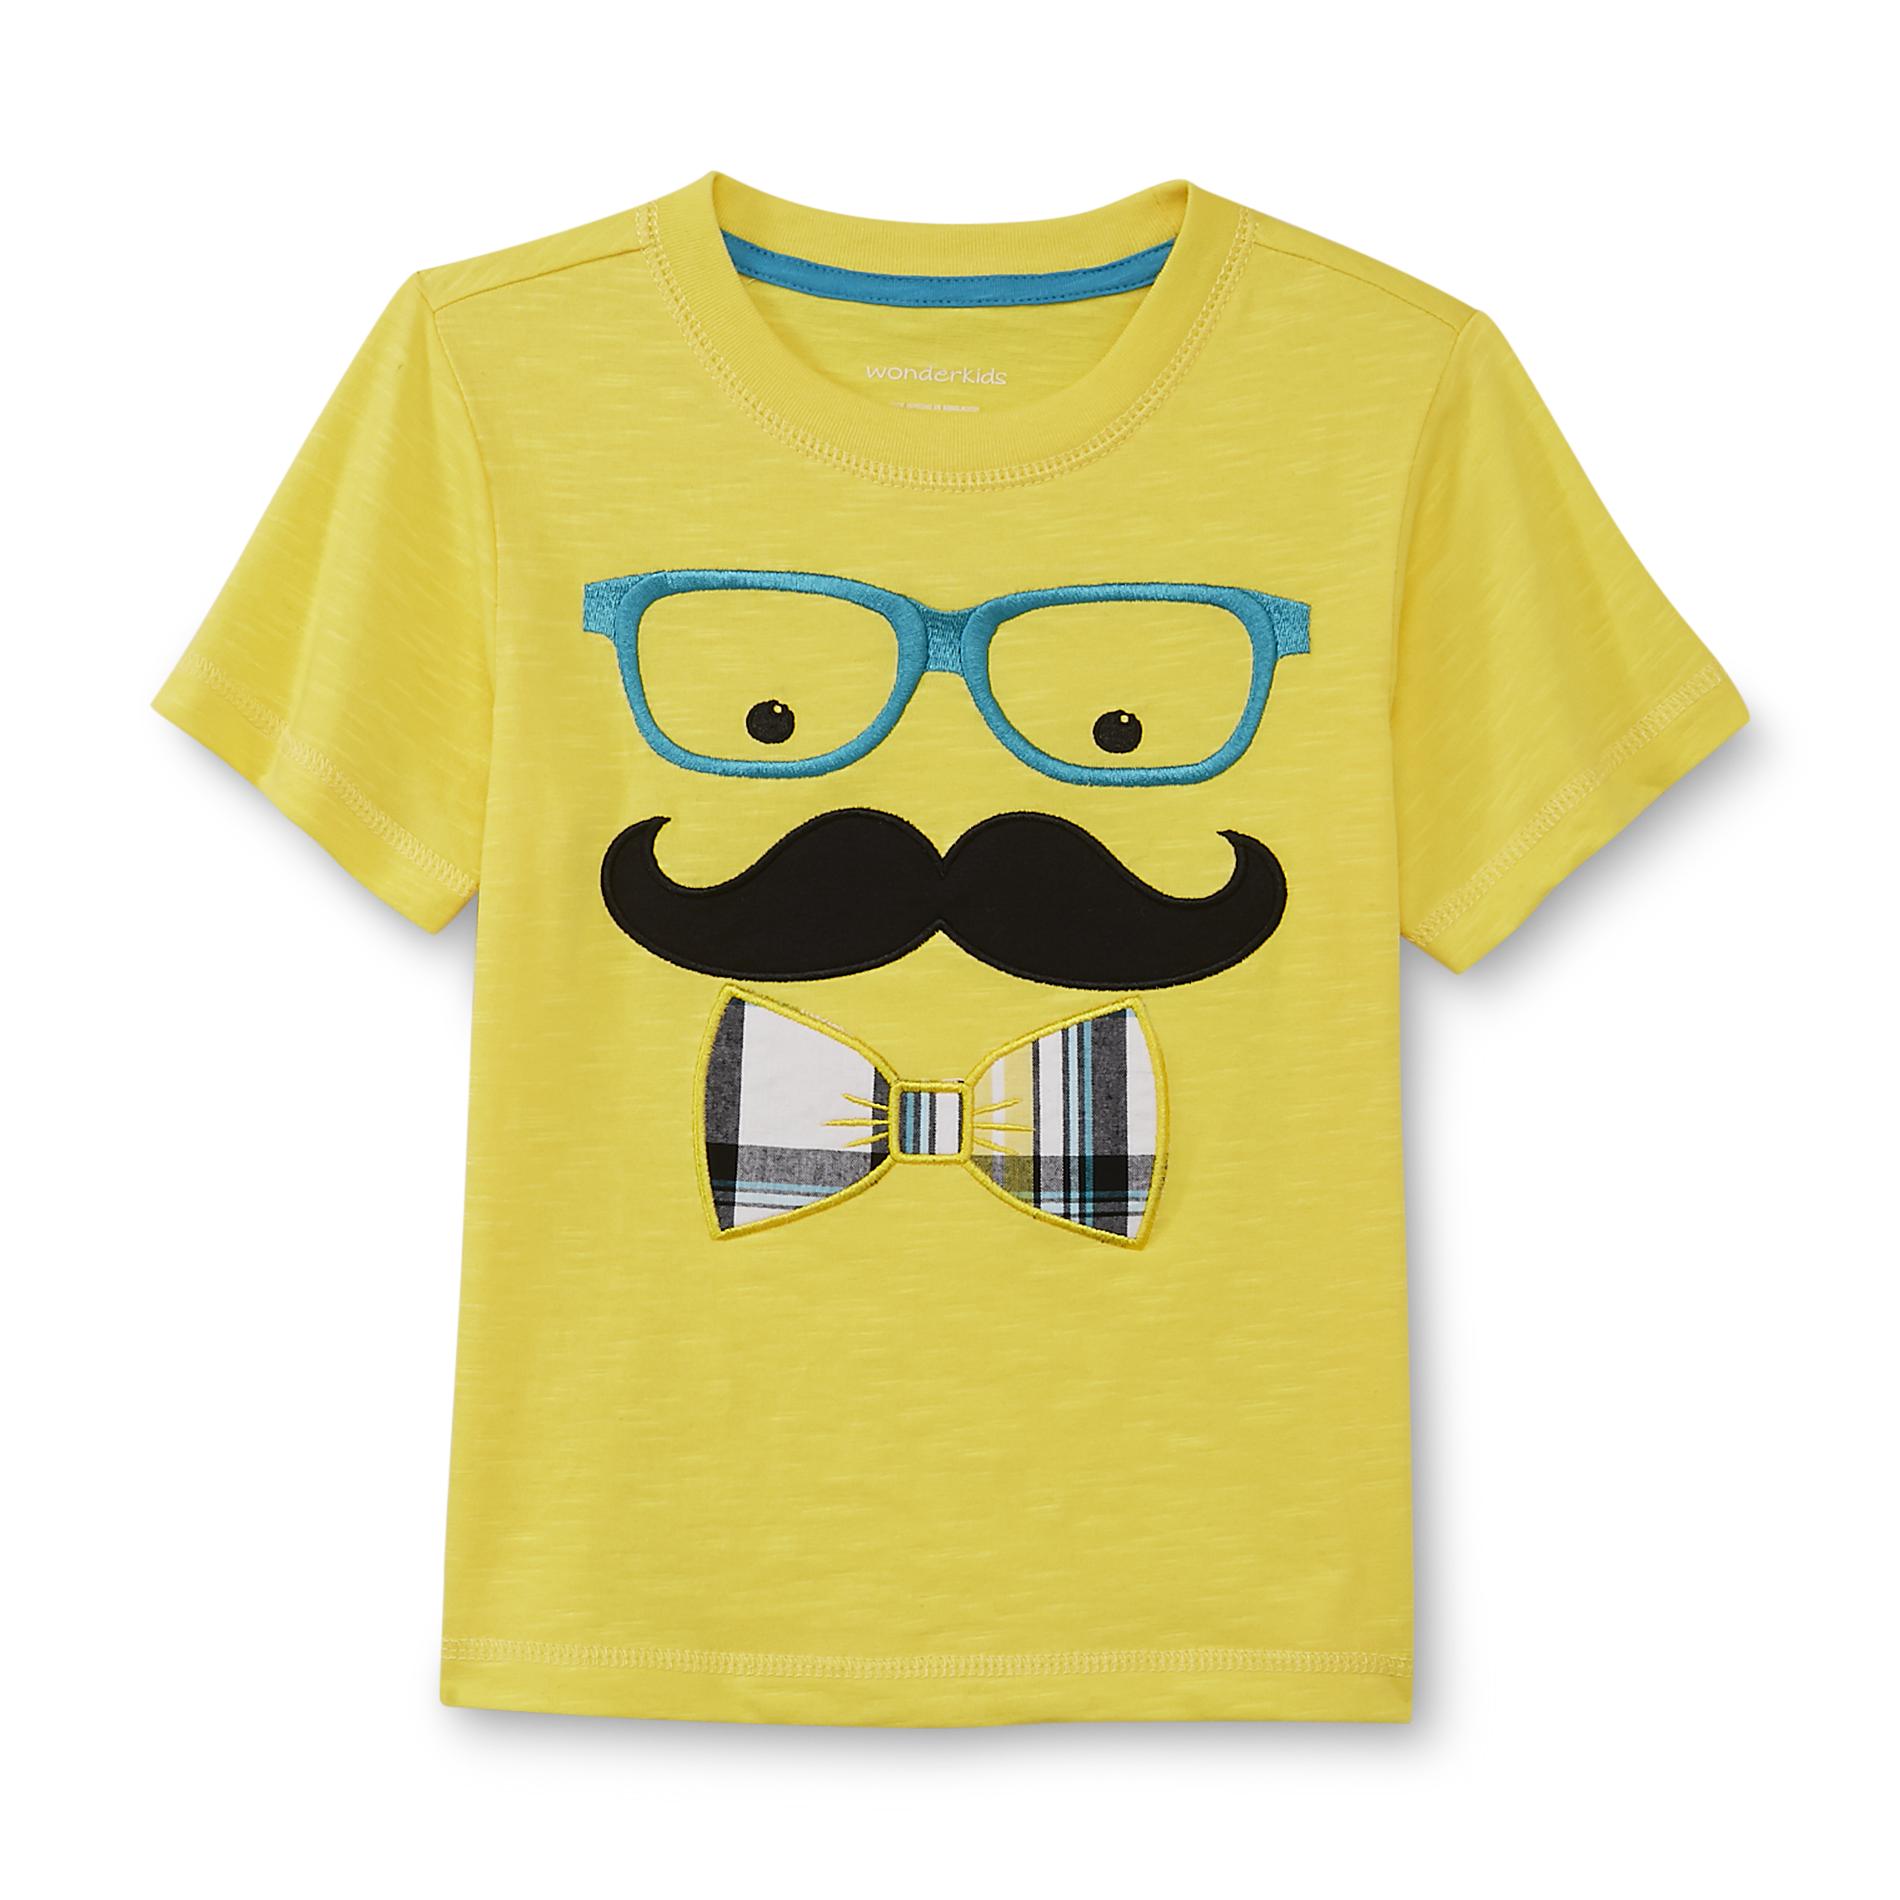 WonderKids Infant & Toddler Boy's Graphic T-Shirt - Silly Face